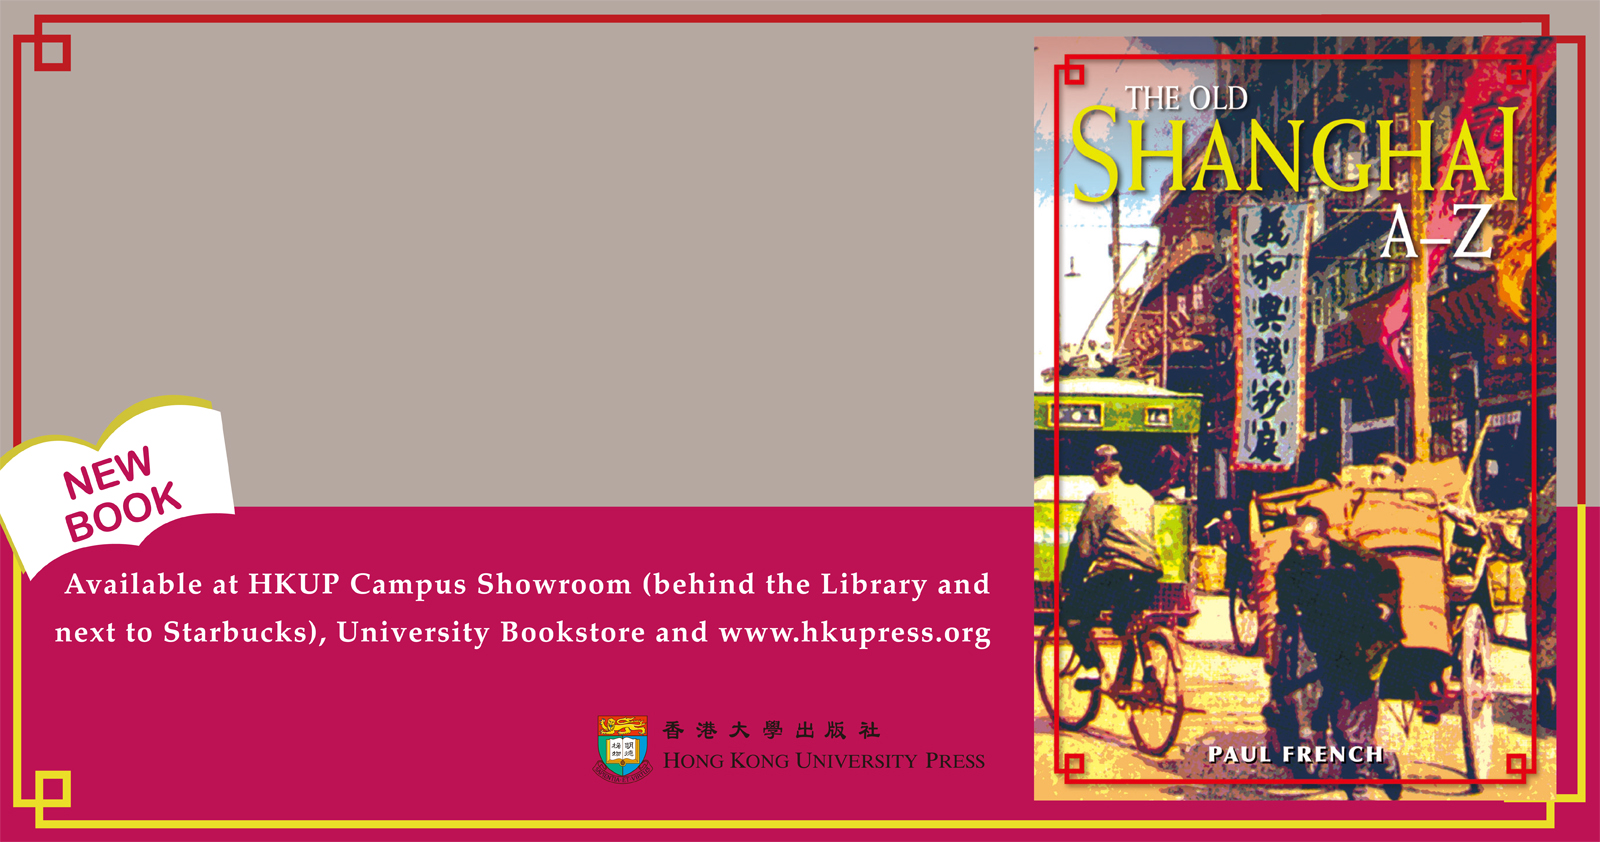 New Book from HKU Press - The Old Shanghai, A-Z